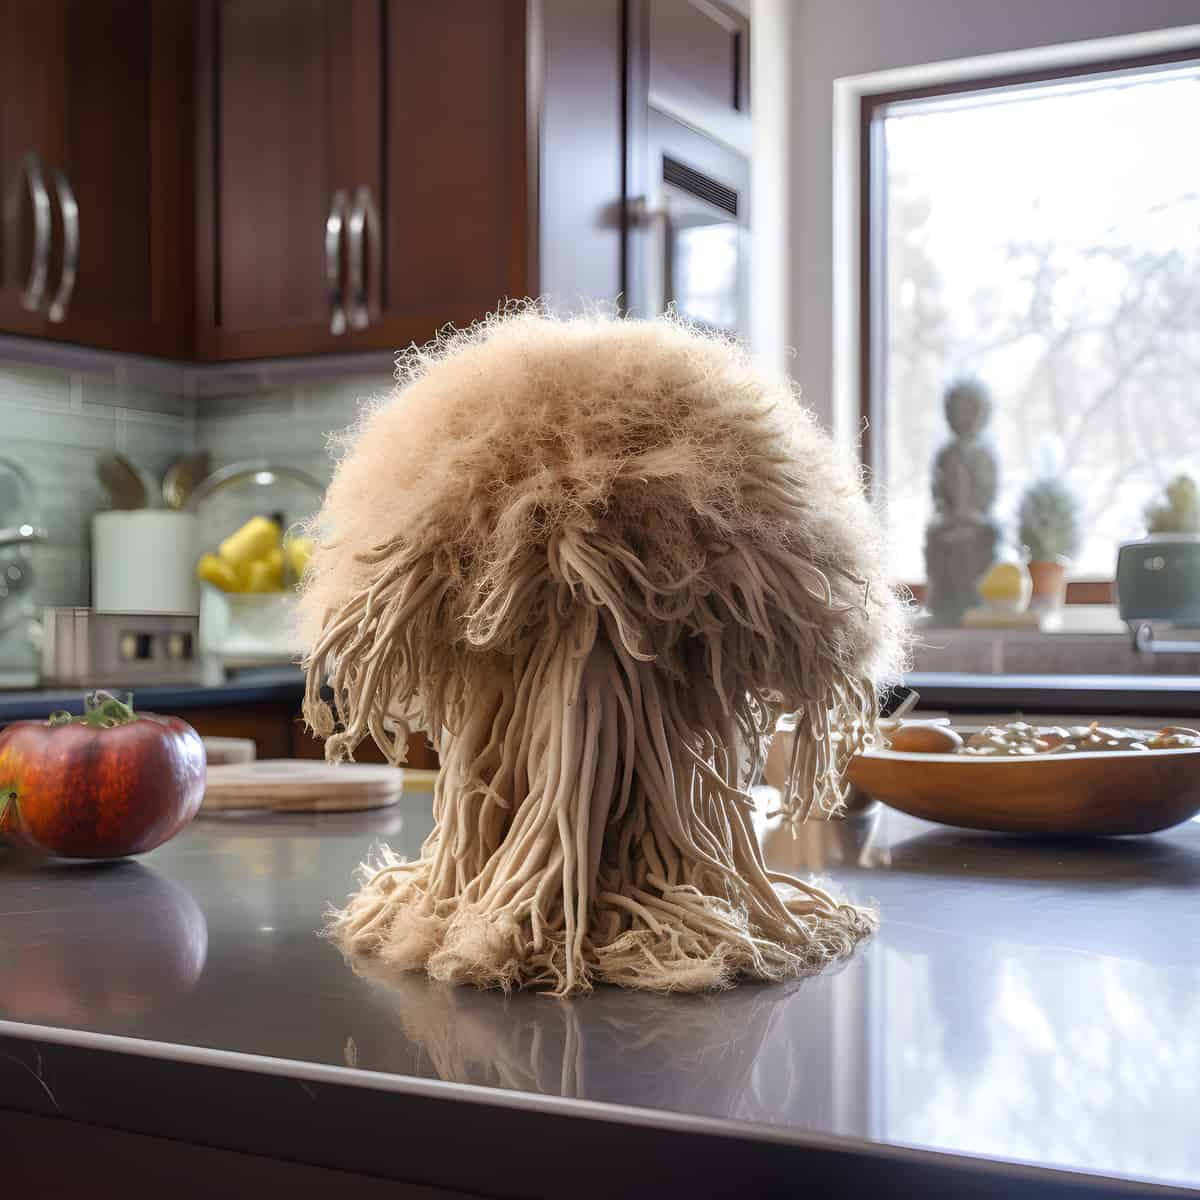 Lions Mane Mushrooms on a kitchen counter